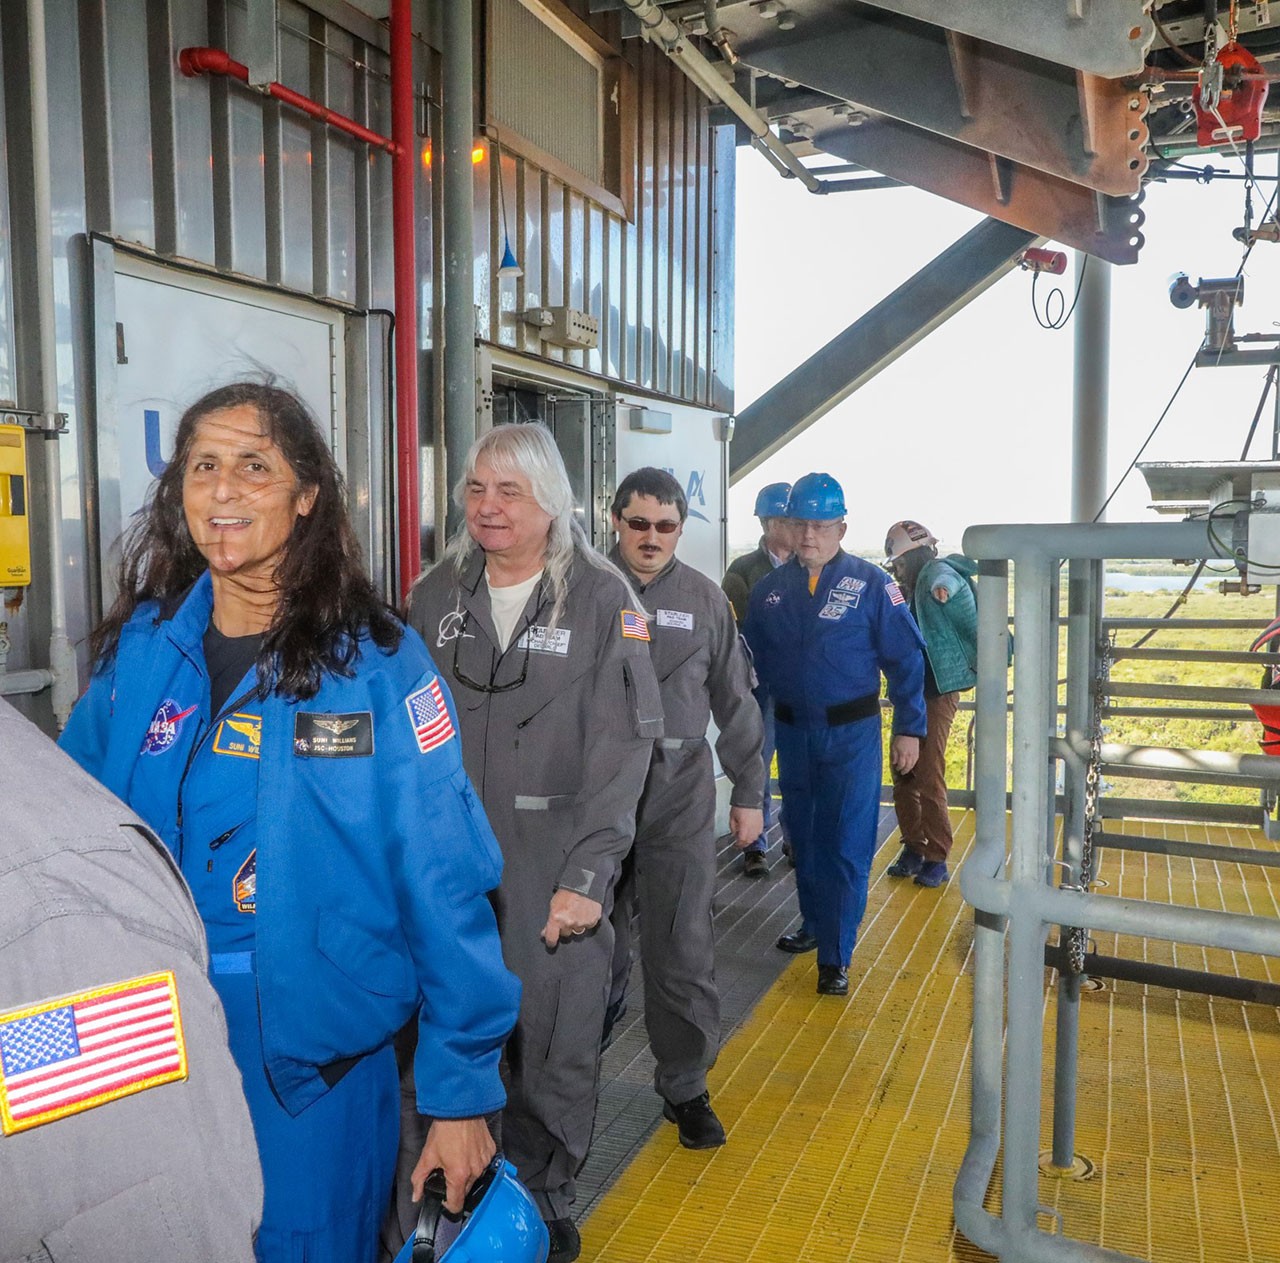 Pad Team members (in gray, from left) Michael Decarlo and Ed Bourne, Jr. with NASA astronauts Suni Williams and Mike Fincke, backup pilot, at Space Launch Complex-41 during an Integrated Crew Exercise.